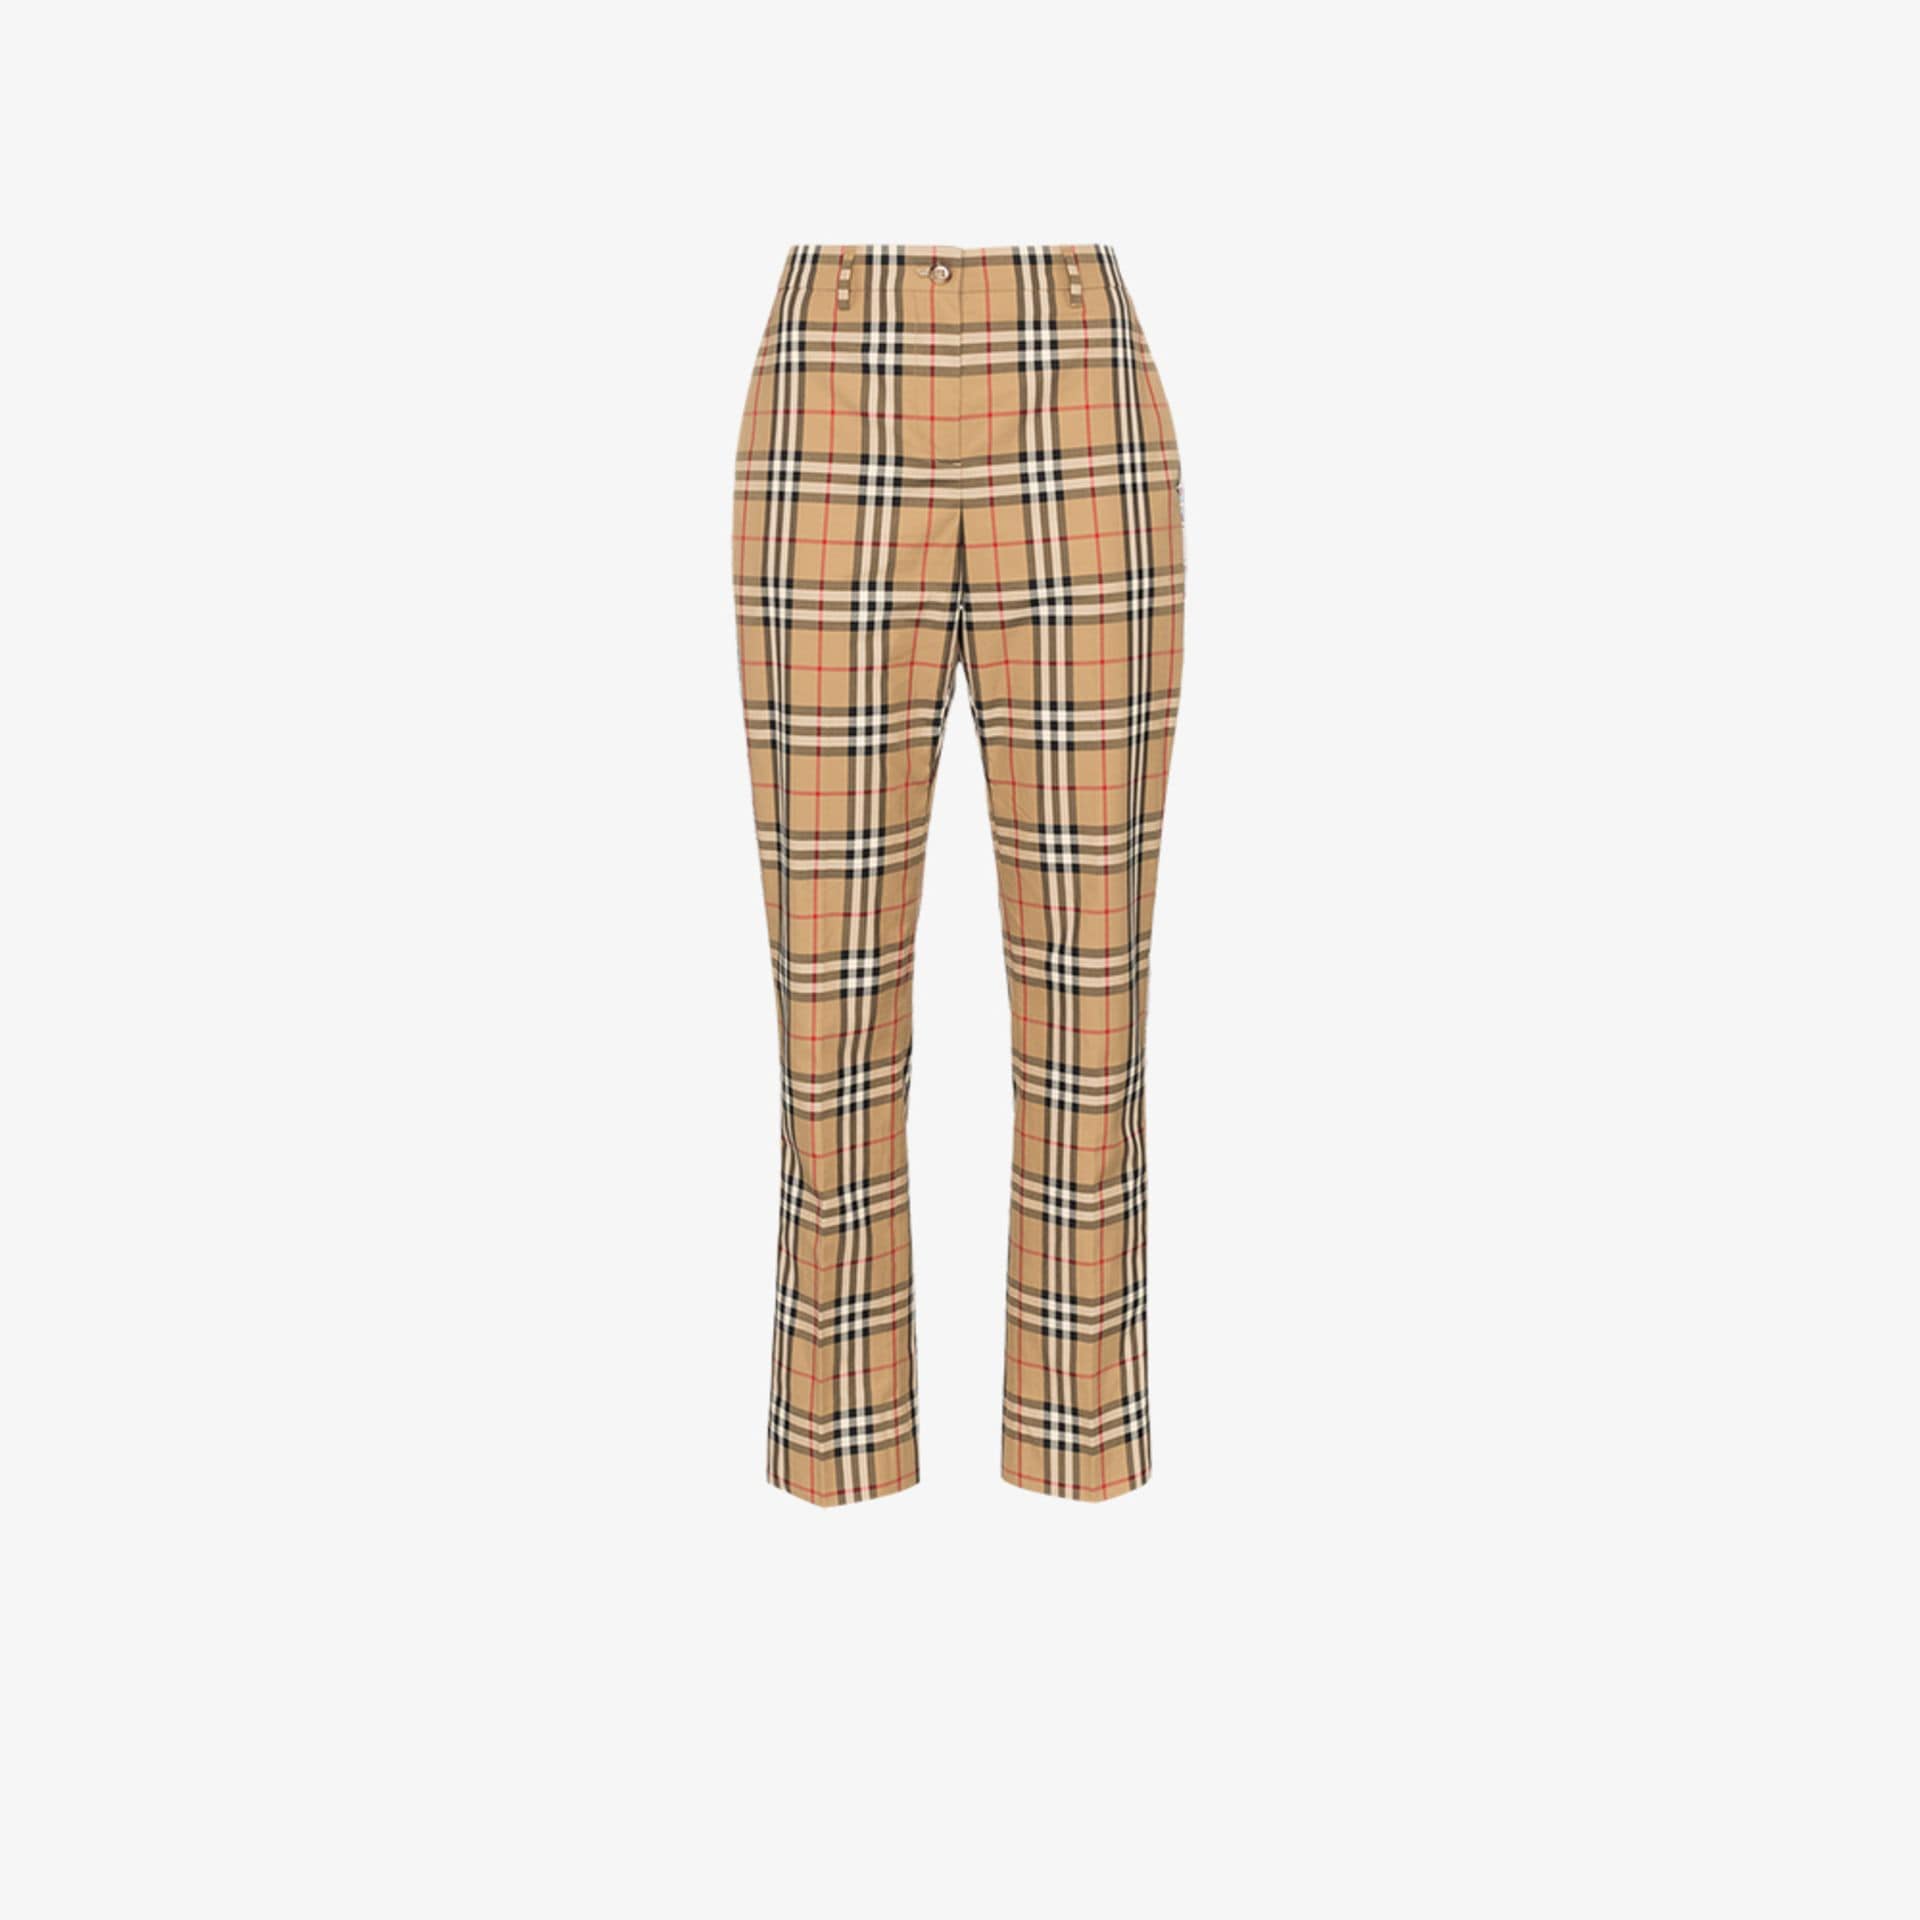 burberry trousers mens vintage